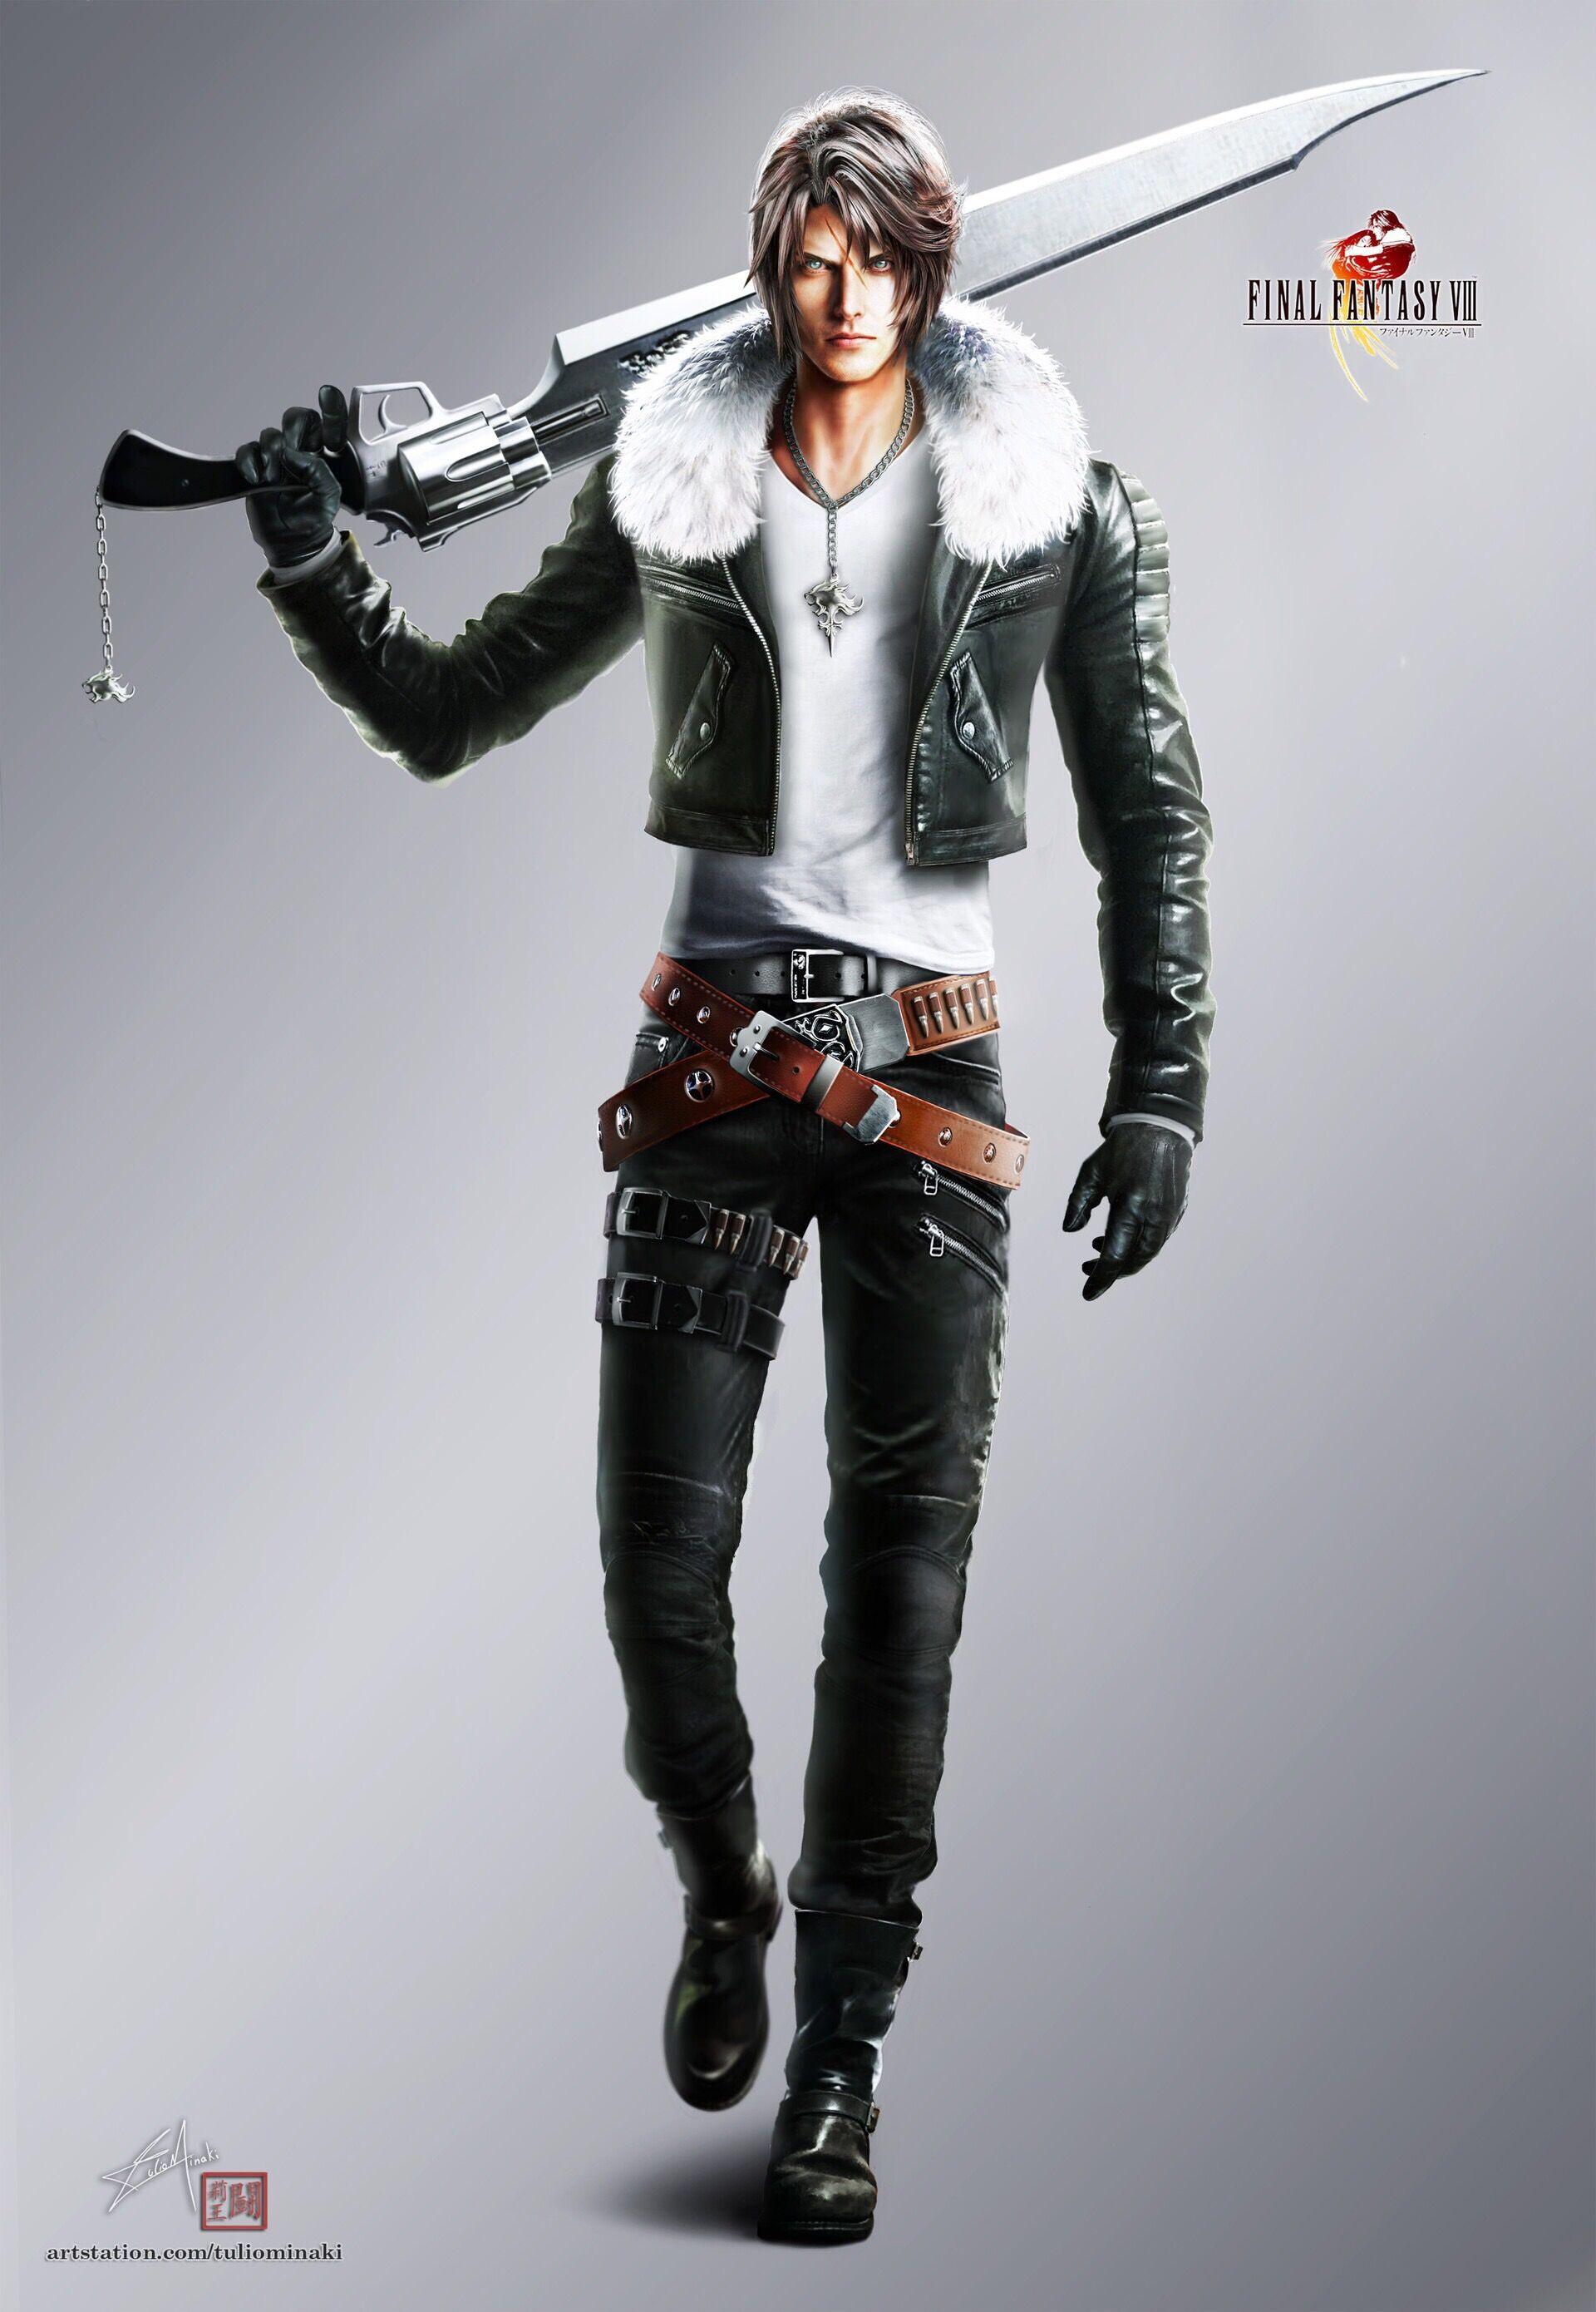 1920x2781 Final Fantasy VIII Squall Leonhart by TulioMinaki on | Final fantasy, Final fantasy characters, Squall